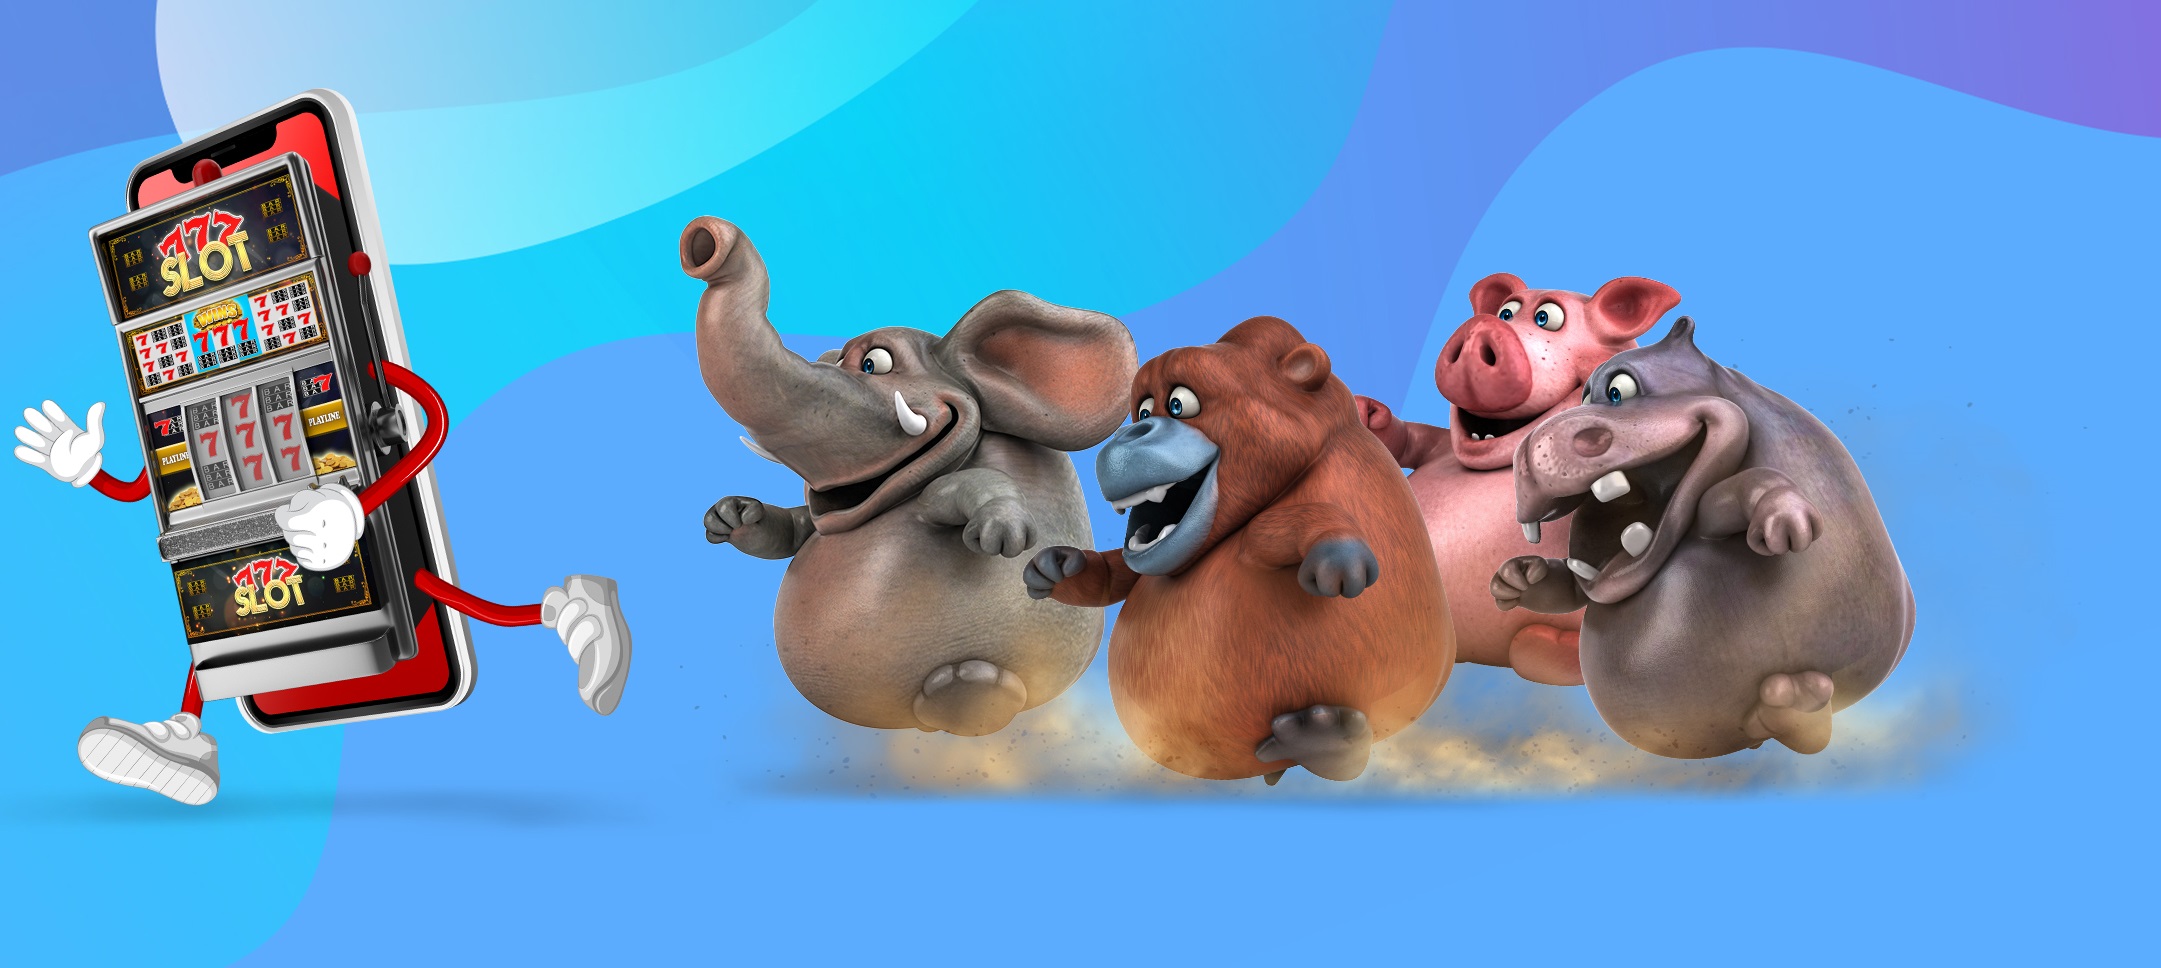 A 3D-animated mobile phone with an affixed slot machine and arms and legs, is running away from four 3D-animated characters - an elephant, a gorilla, a pig, and a hippopotamus, collecting dust during their chase.